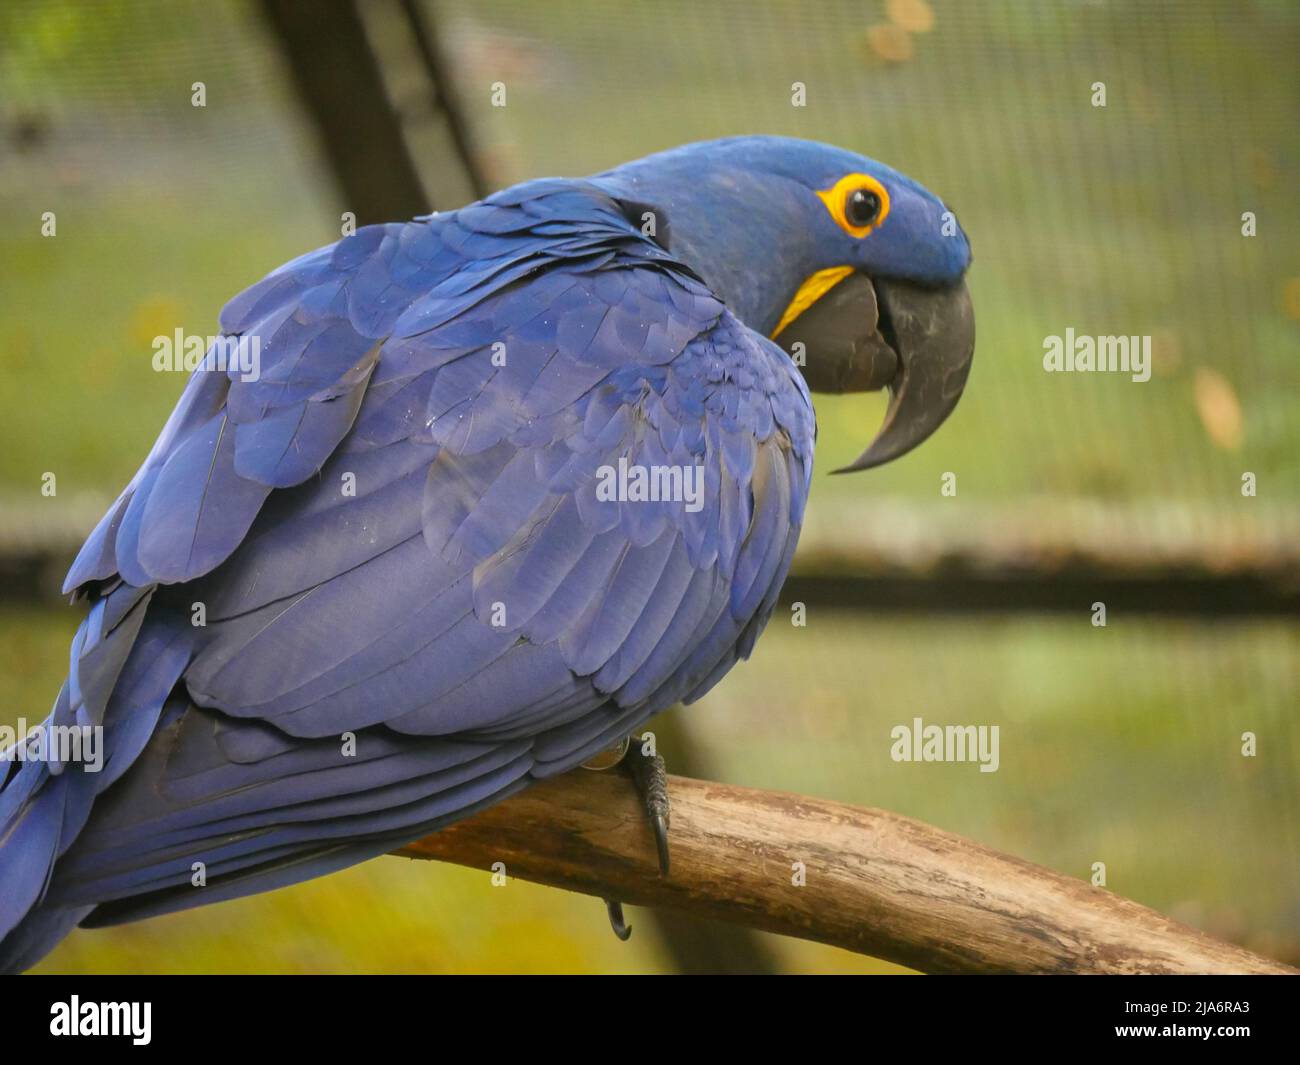 Hyacinth macaw (Anodorhynchus hyacinthinus), or hyacinthine macaw, is a parrot seated on wood log in park Stock Photo